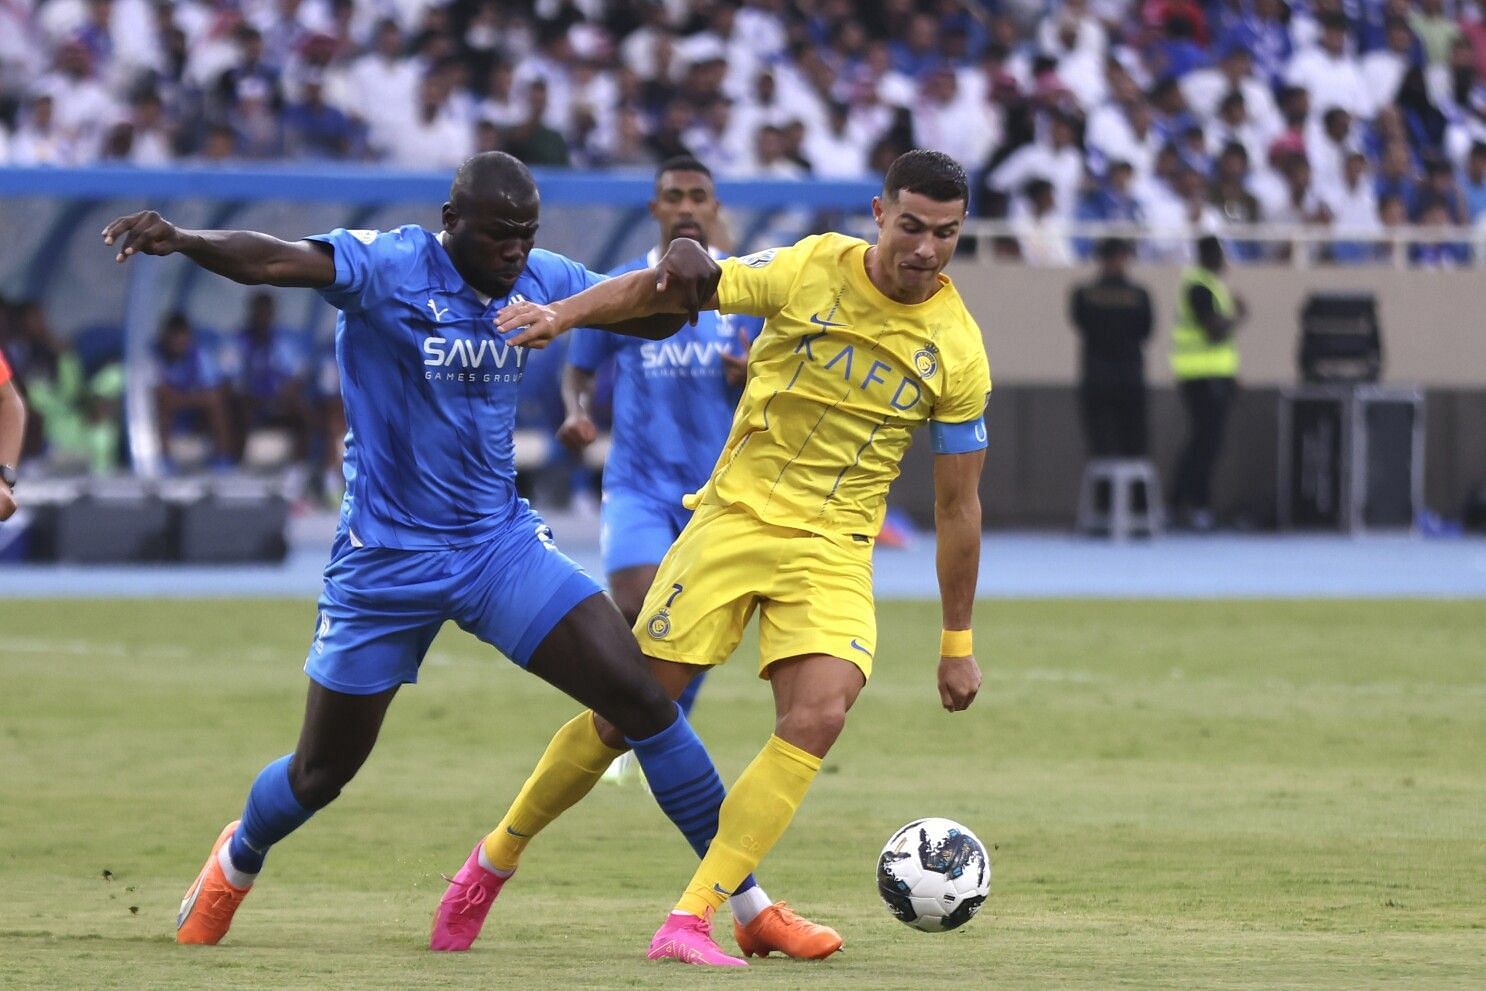 Al Hilal will square off against Al Nassr in the Saudi Pro League on Friday